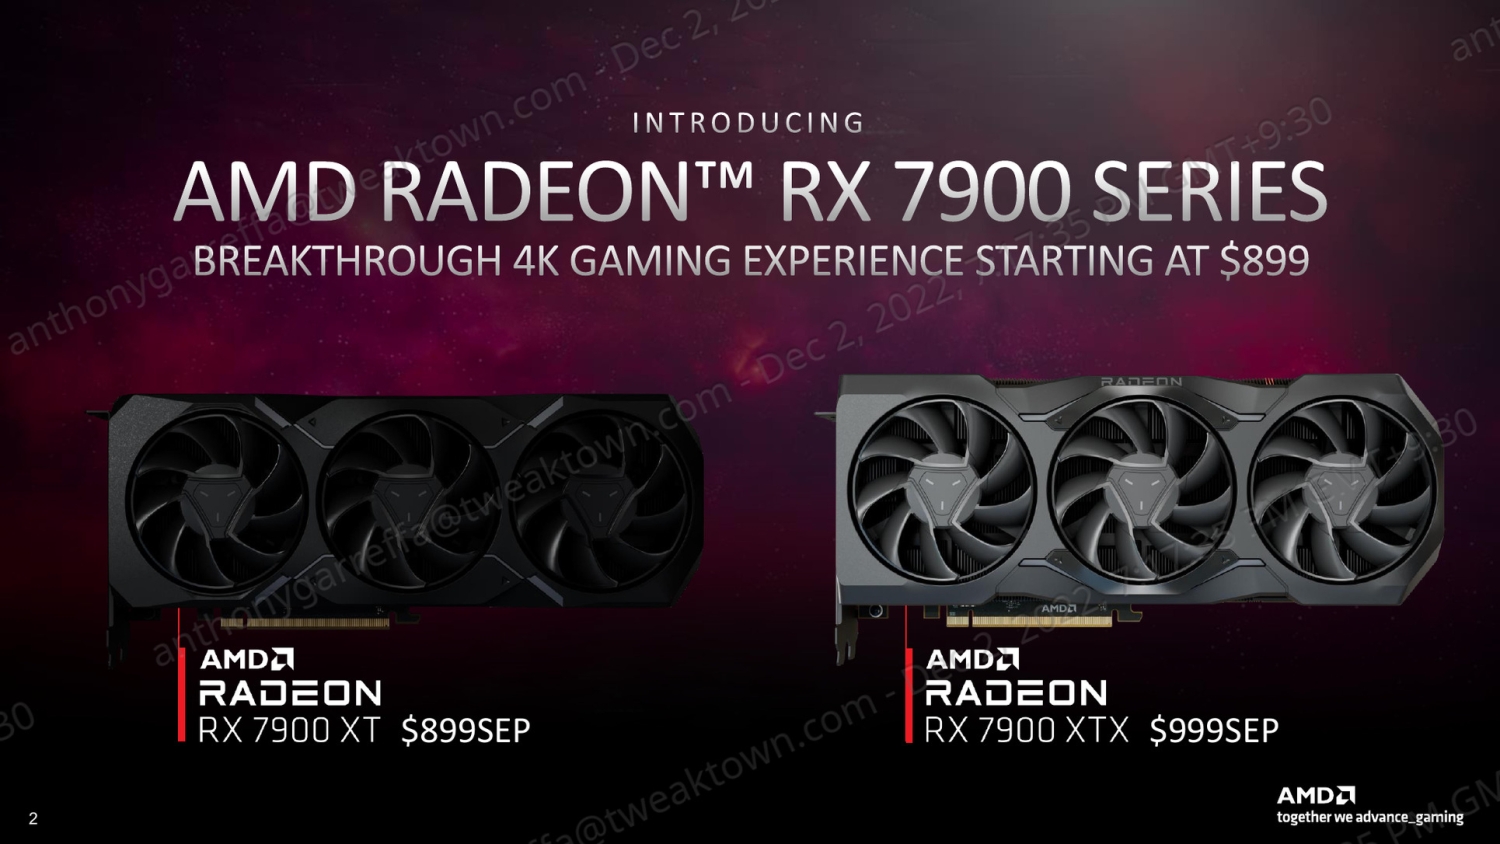 AMD Radeon RX 7900 XT review: $899 to join the Navi clan